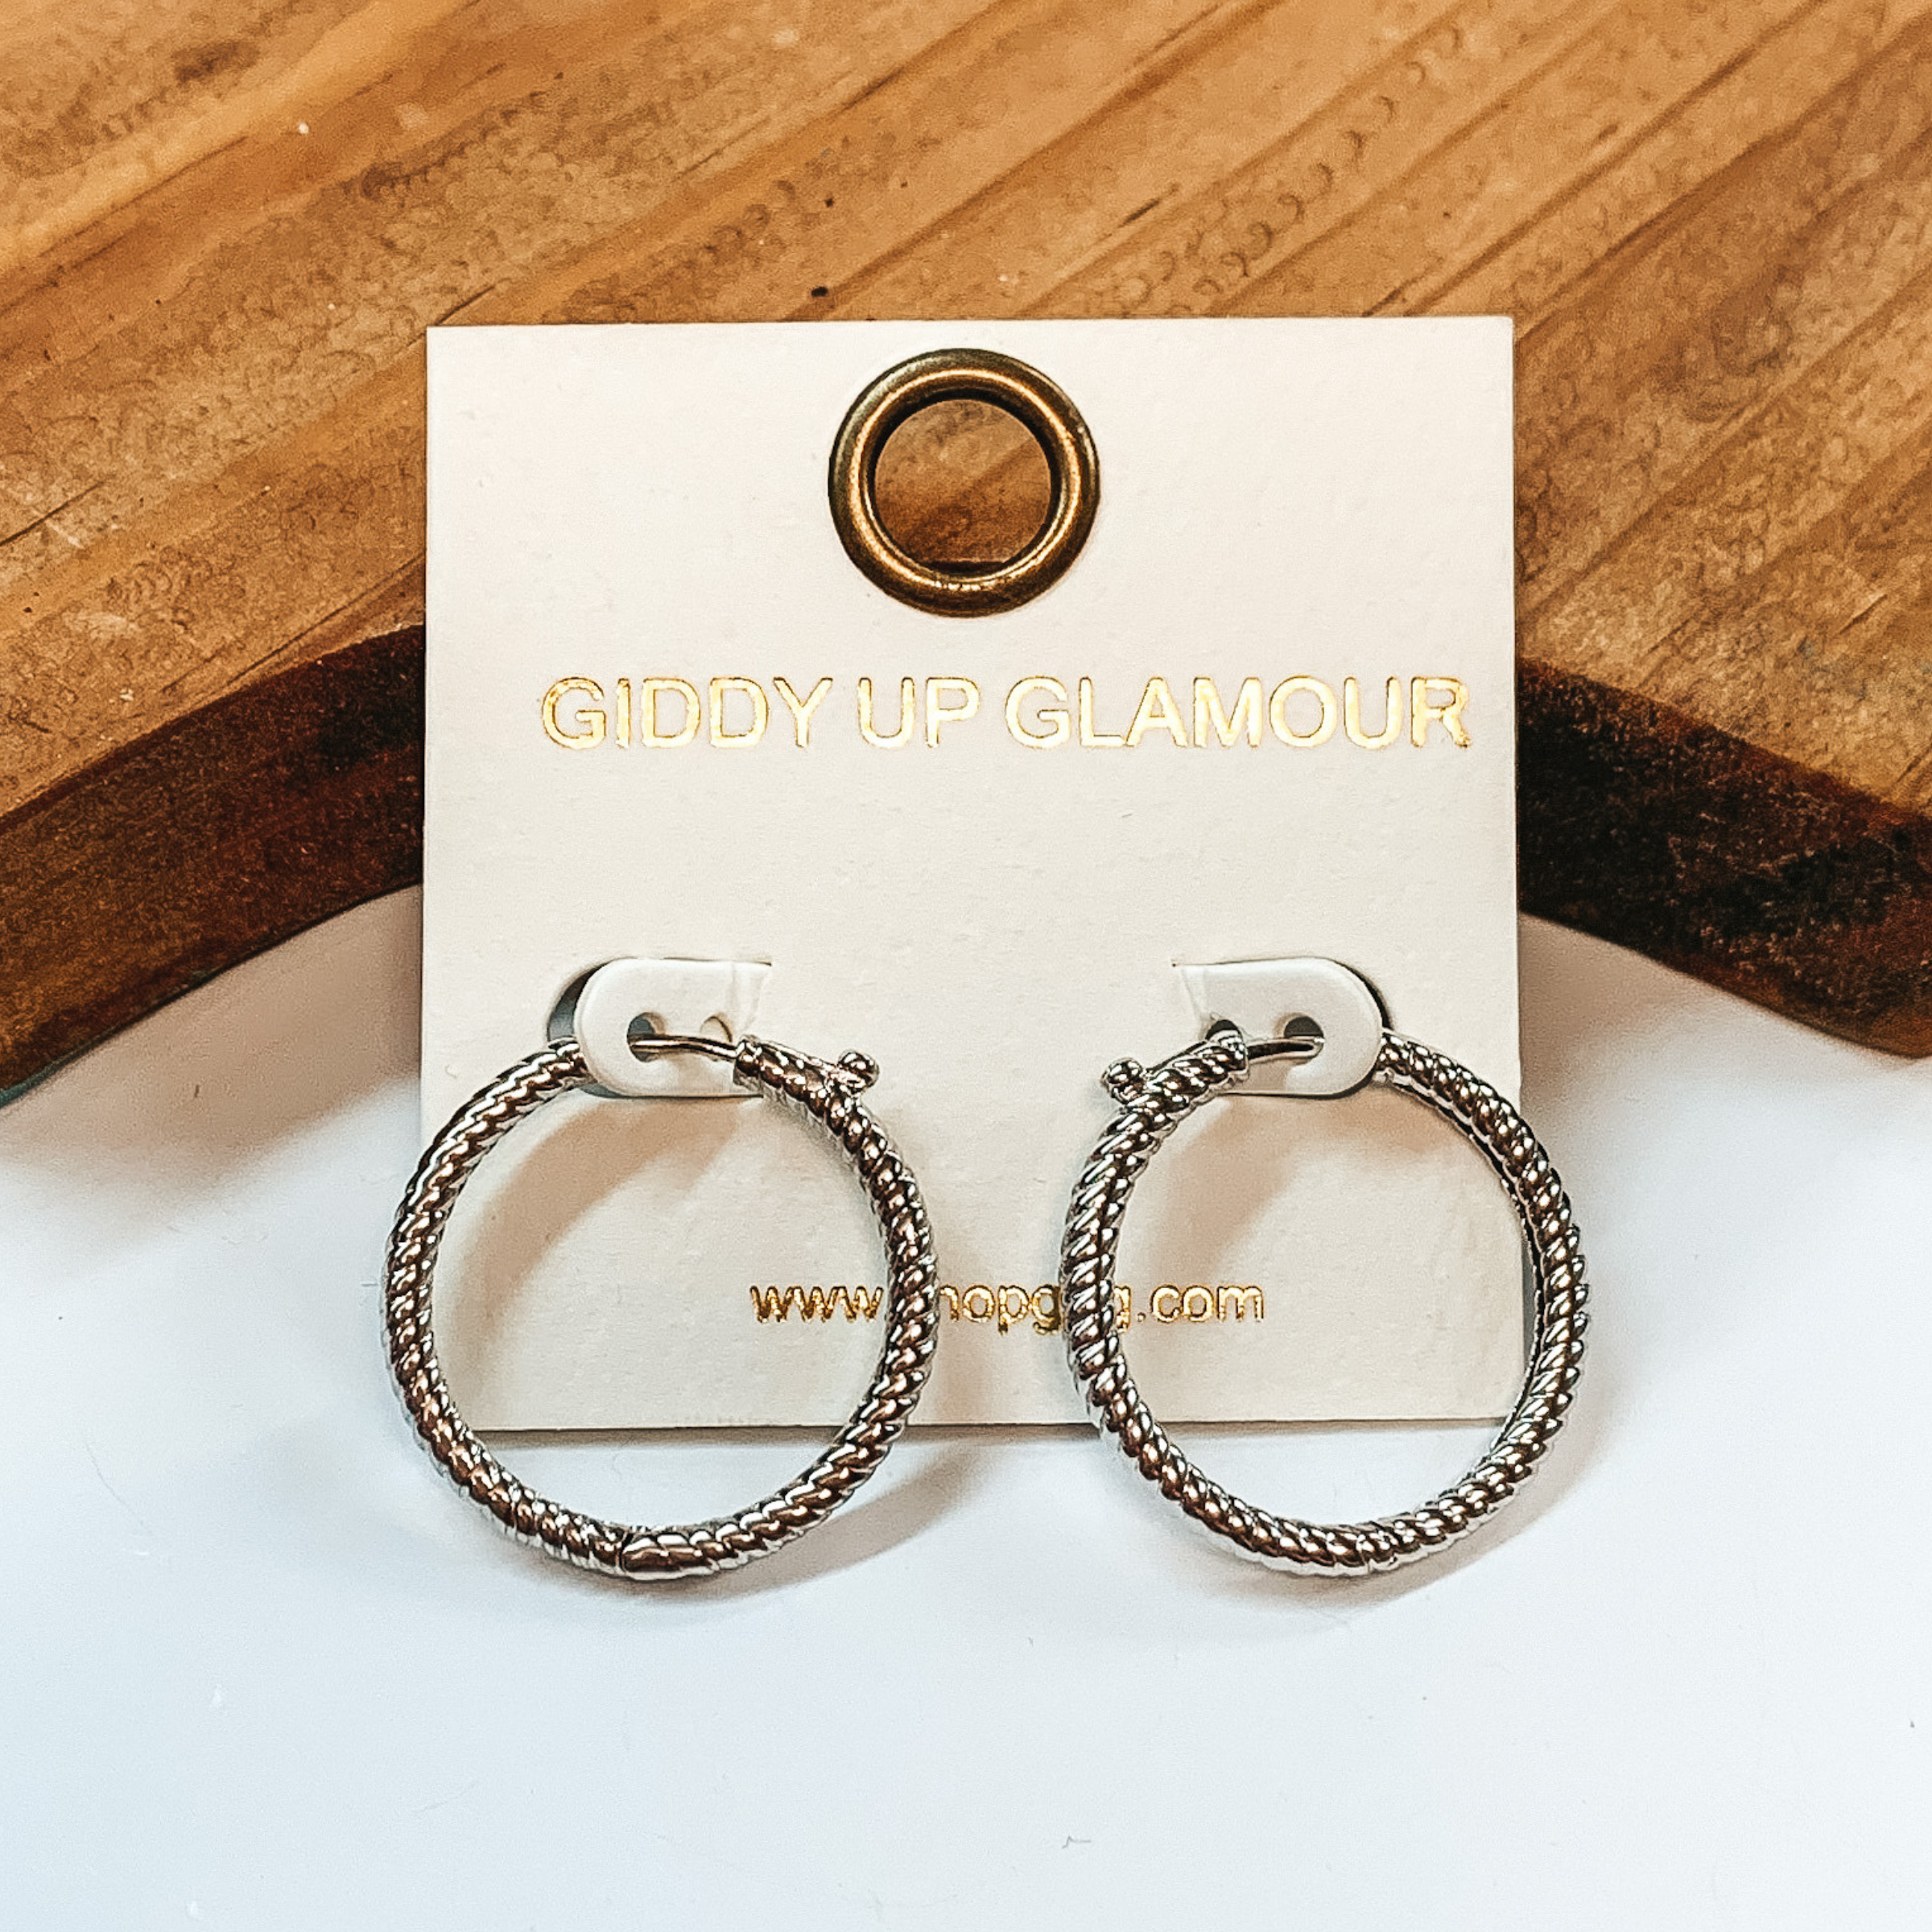 Small silver hoop earrings with rope texture. Taken on a white background with a brown block in the back.